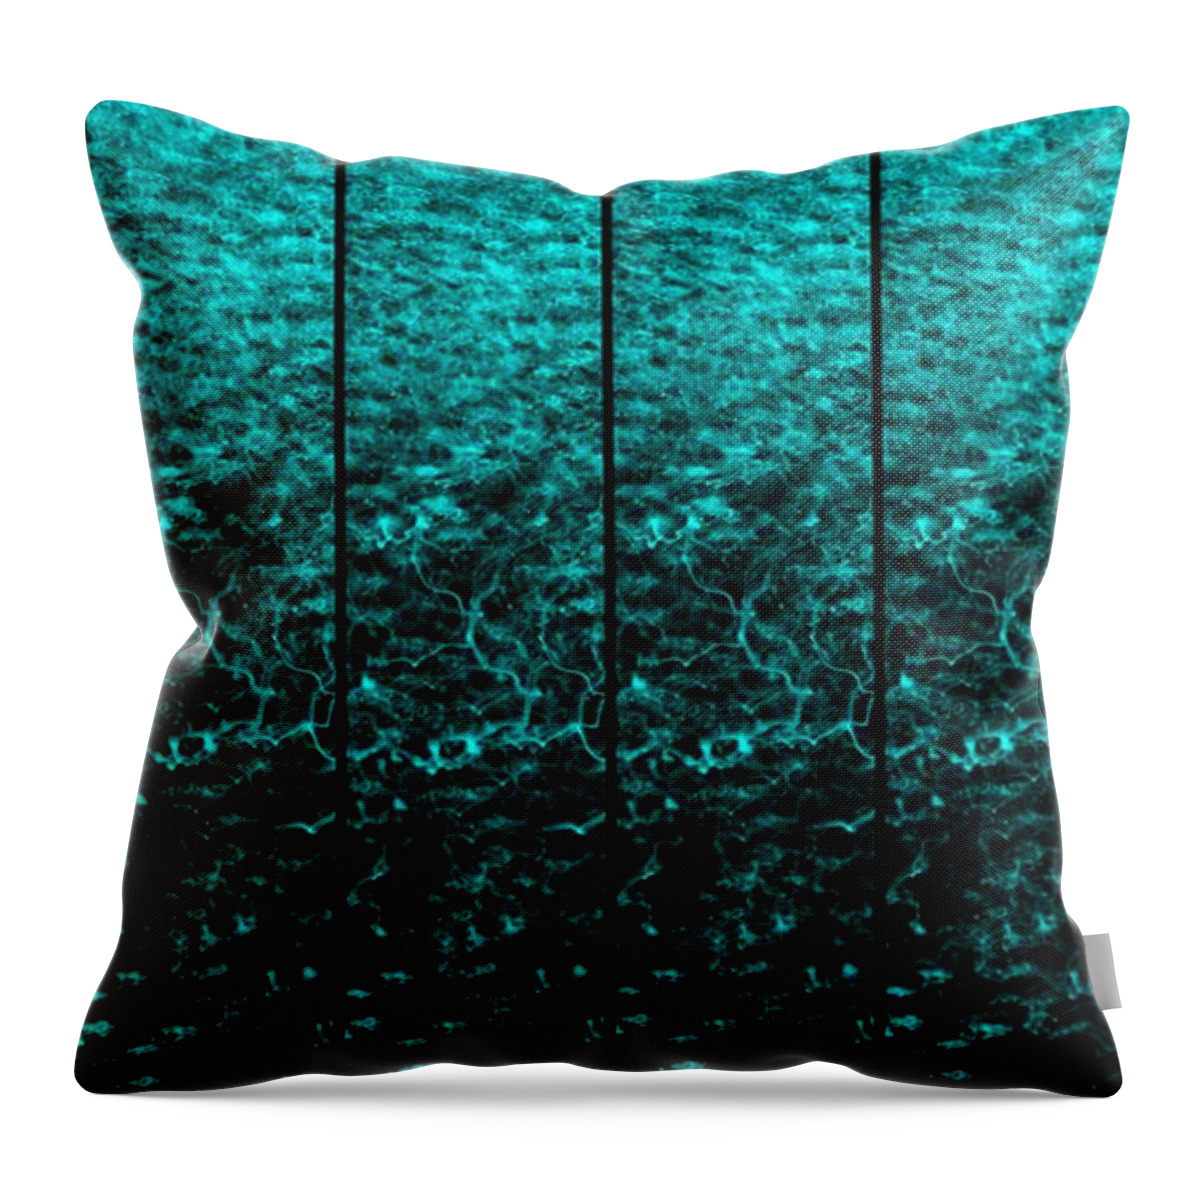 Luminescence 1a Throw Pillow featuring the photograph Luminescence 1a by Darla Wood